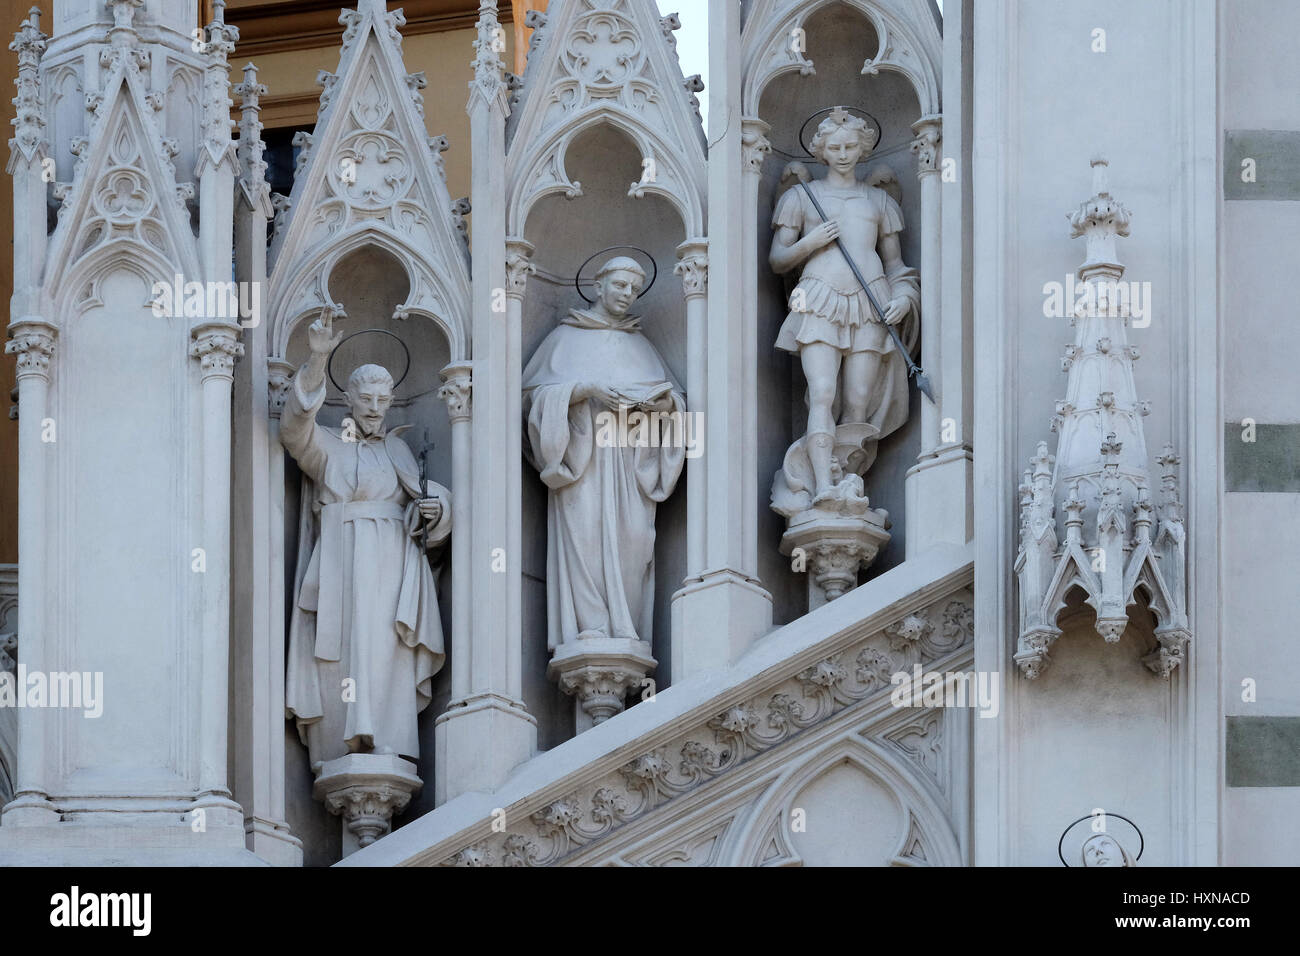 Statues of St. Francis Xavier, Dominic of Guzman and Michael Archangel on the facade of Sacro Cuore del Suffragio church i Stock Photo